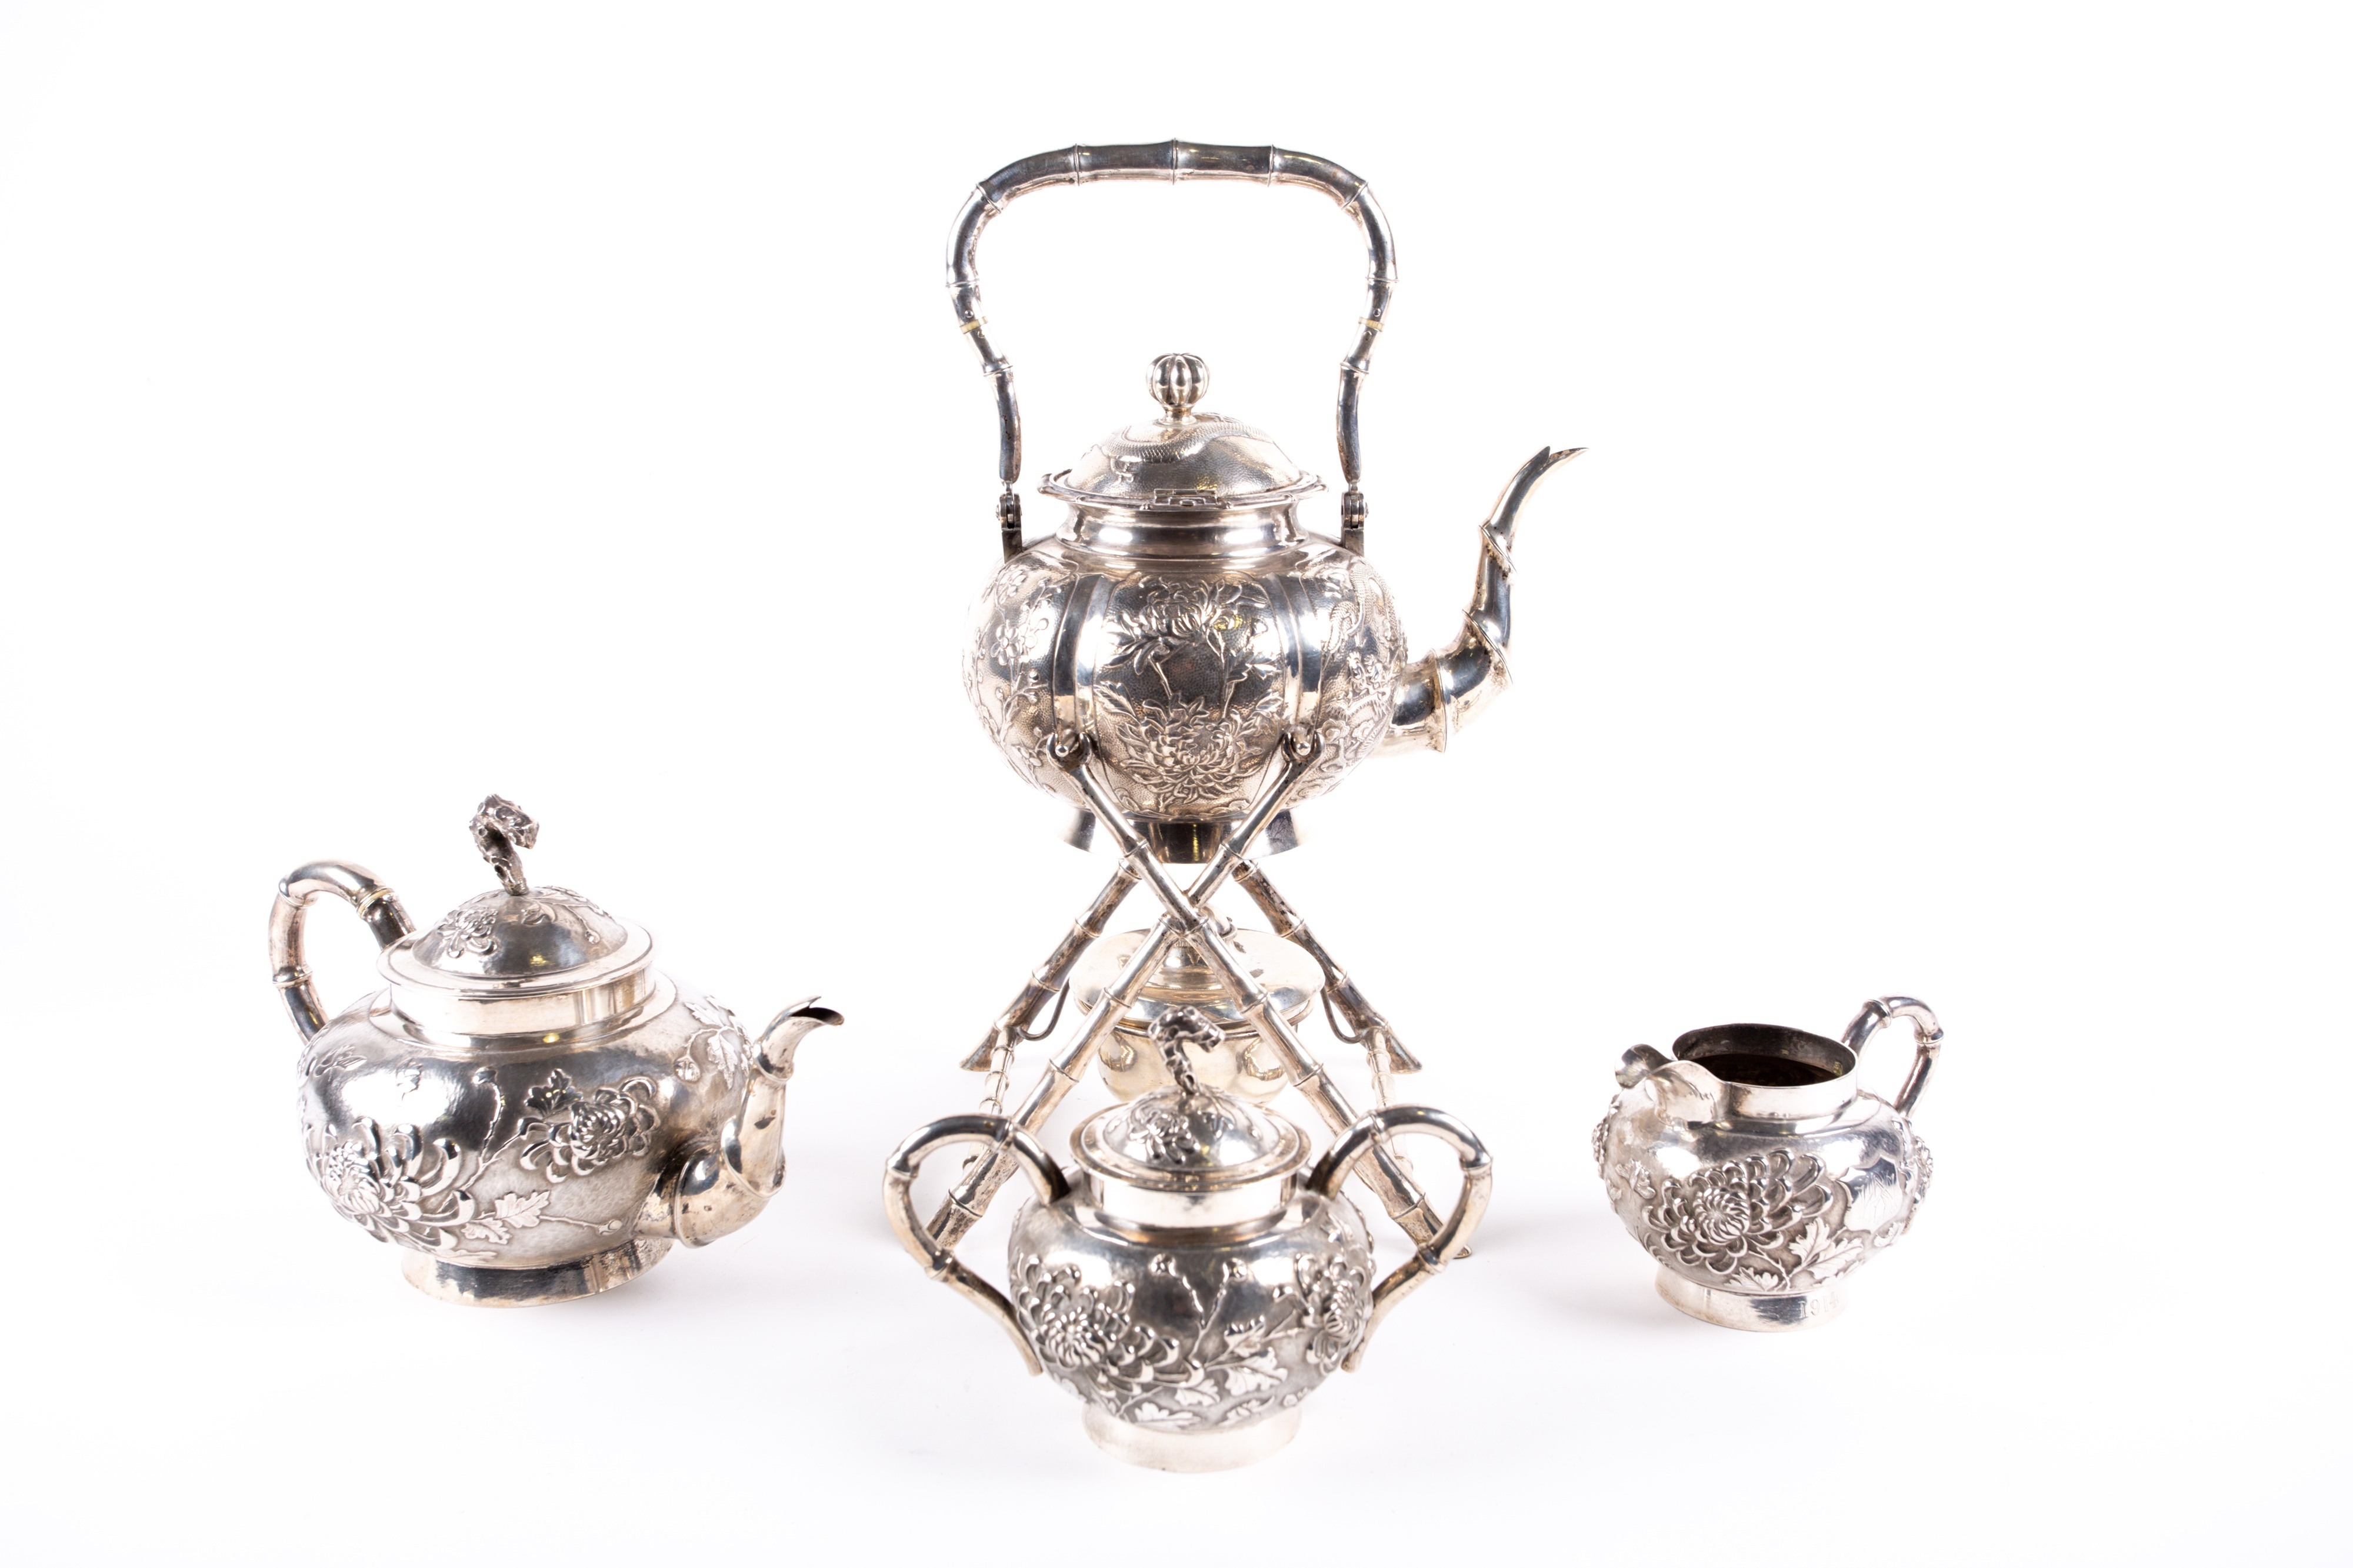 A 19th century Chinese four piece silver tea set by Yok Sang. Sold for £4,000.